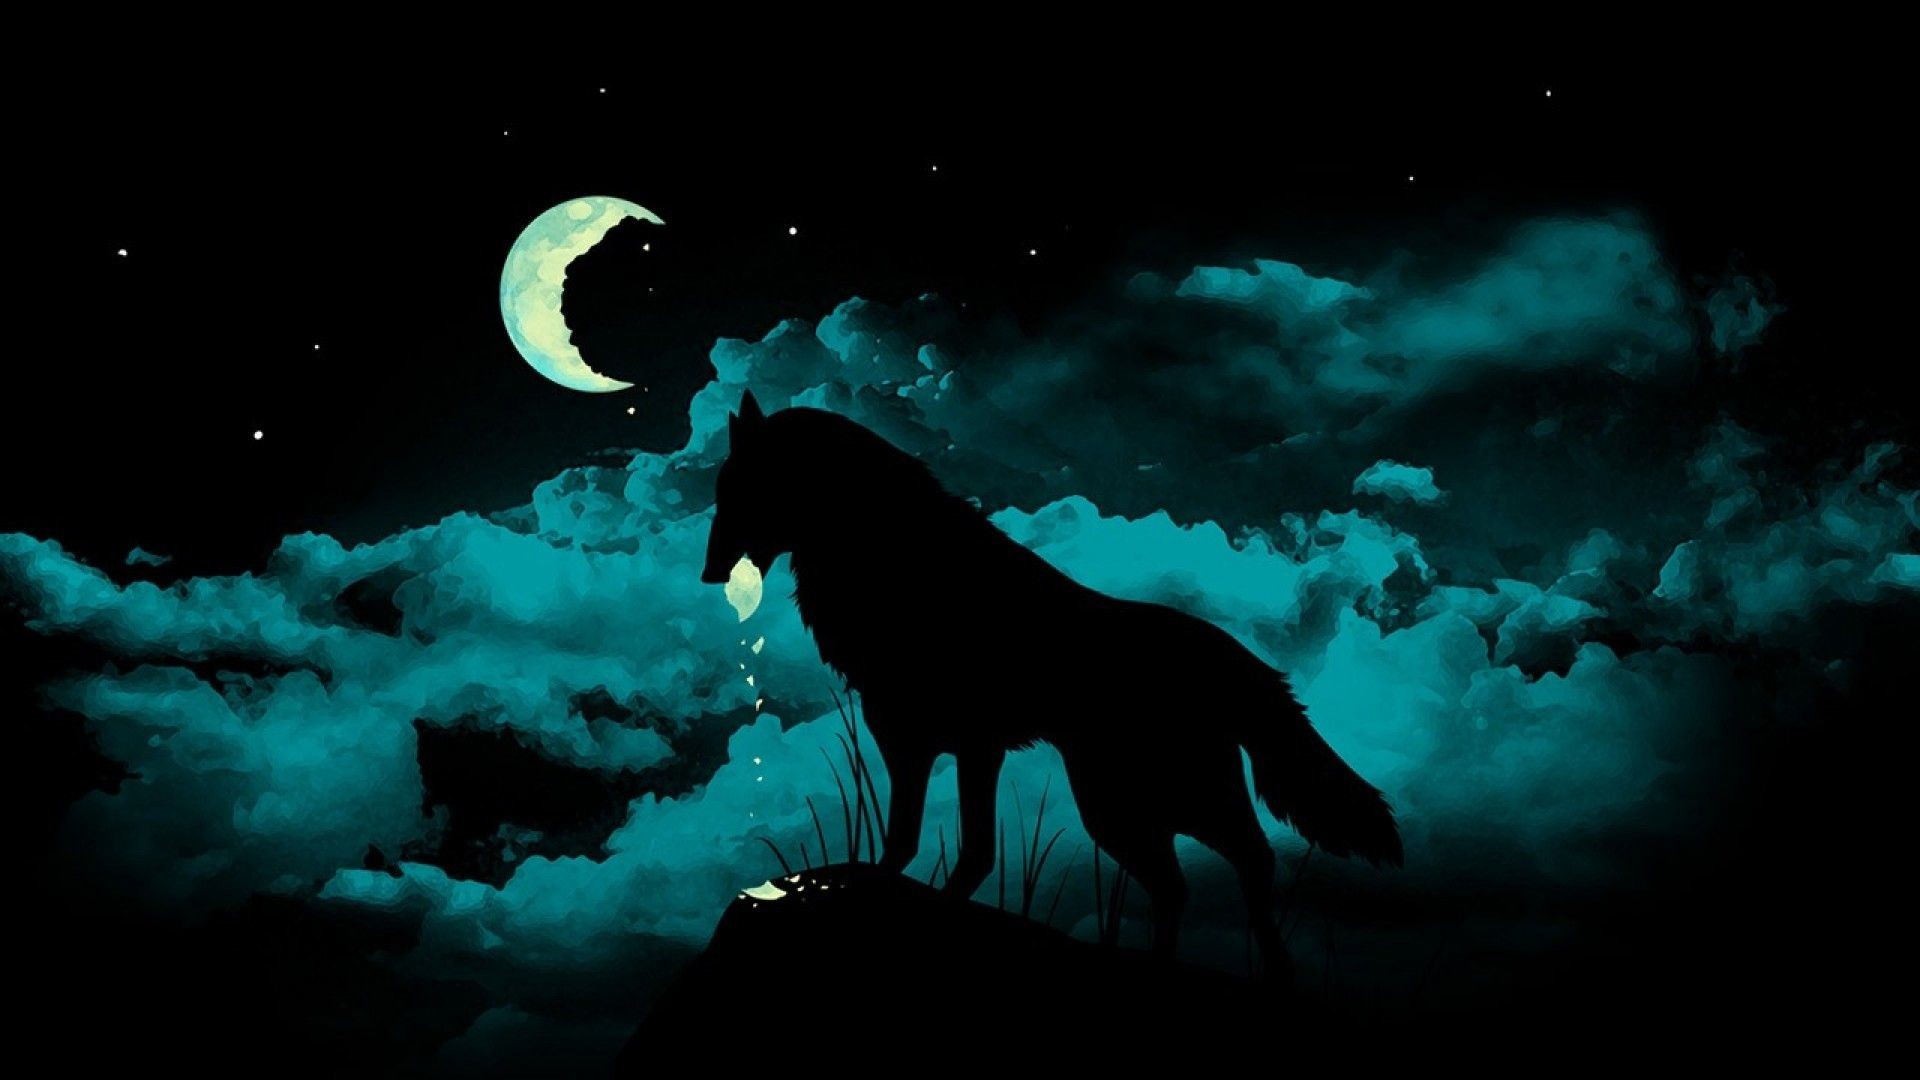 1920x1080  HD Widescreen Wallpapers - wolf and moon pic by Dalton Williams